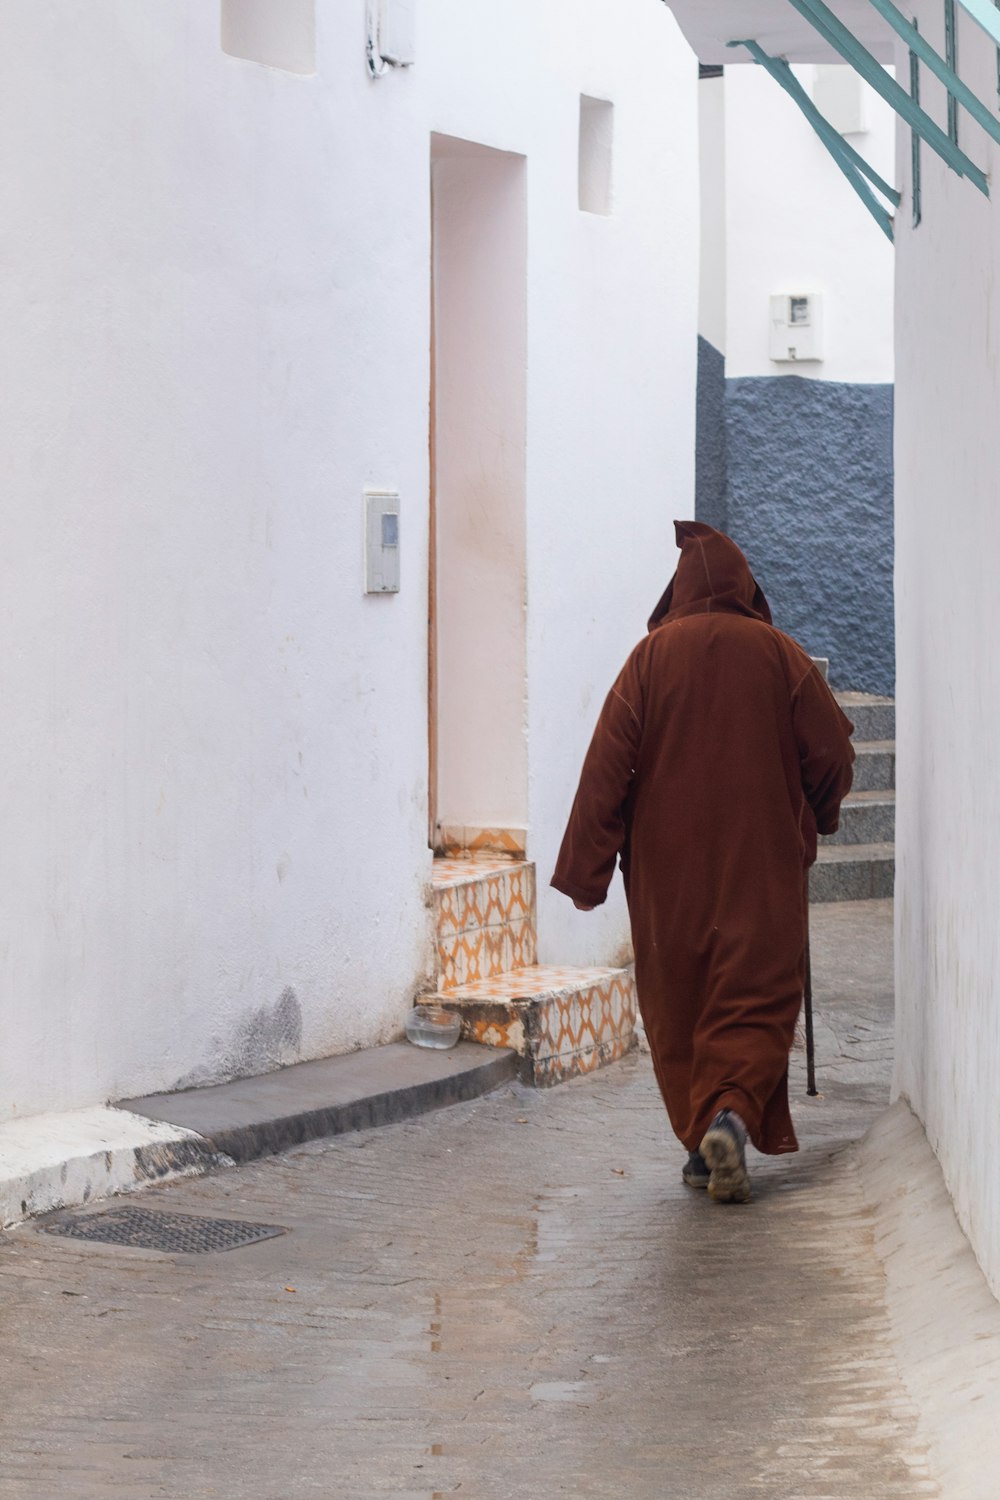 a person in a brown robe walking down a street